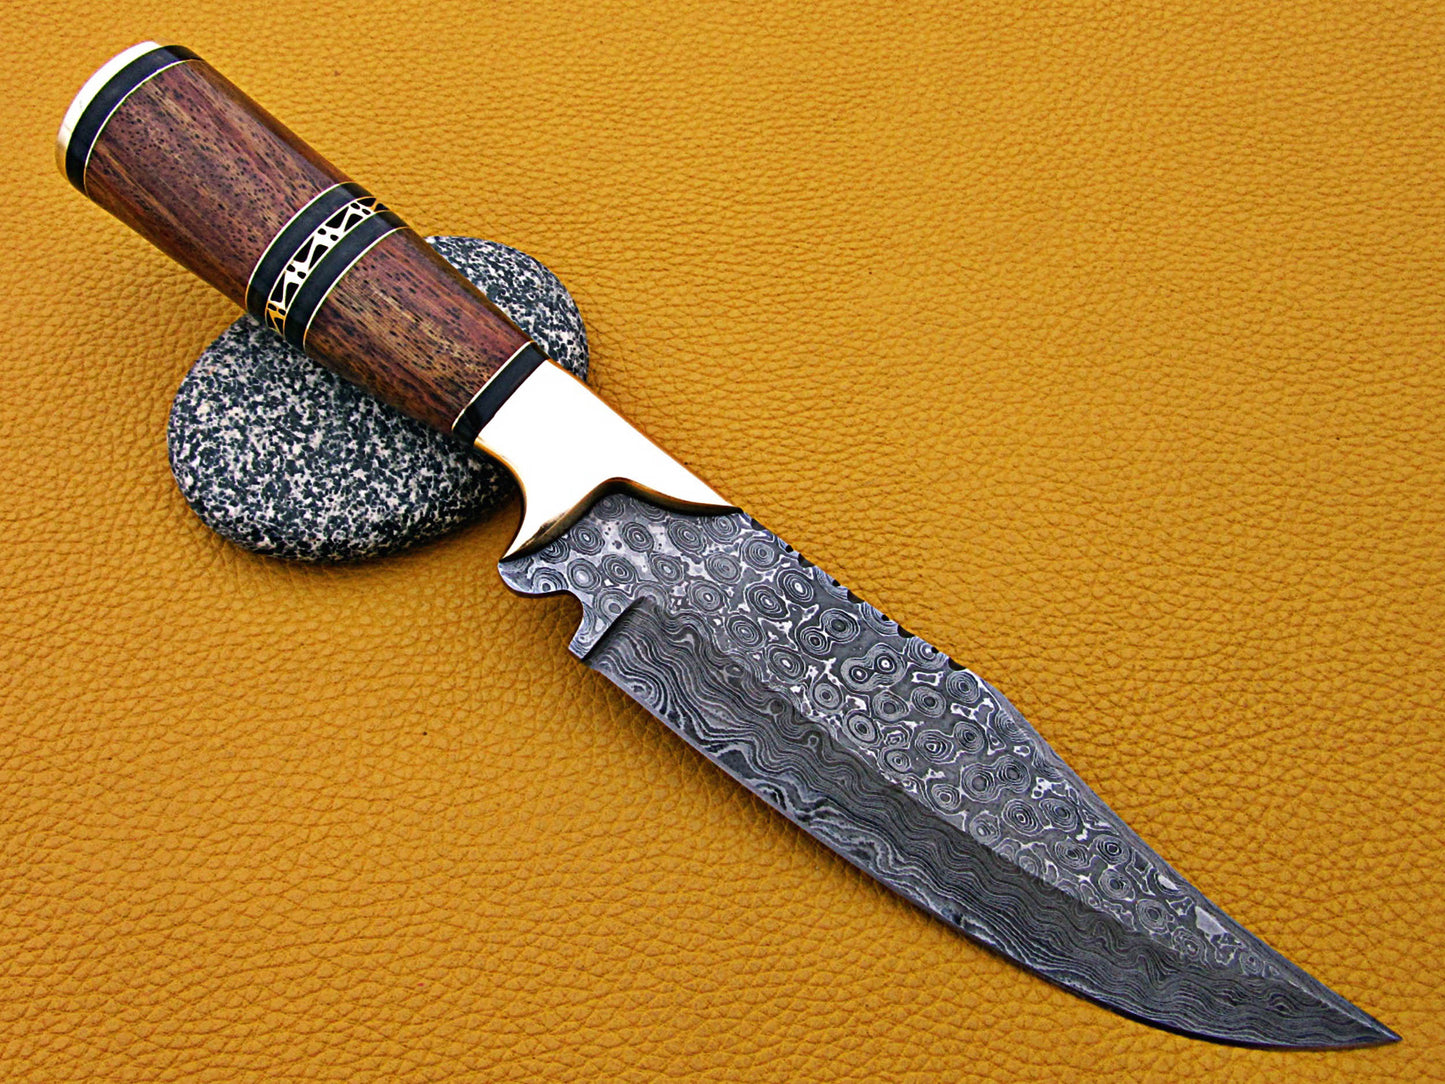 12" Long Damascus steel Skinning Knife hand forged Twist pattern Damascus steel, Rose wood round scale crafted with engraved brass spacer & cap, Cow hide leather sheath with belt loop